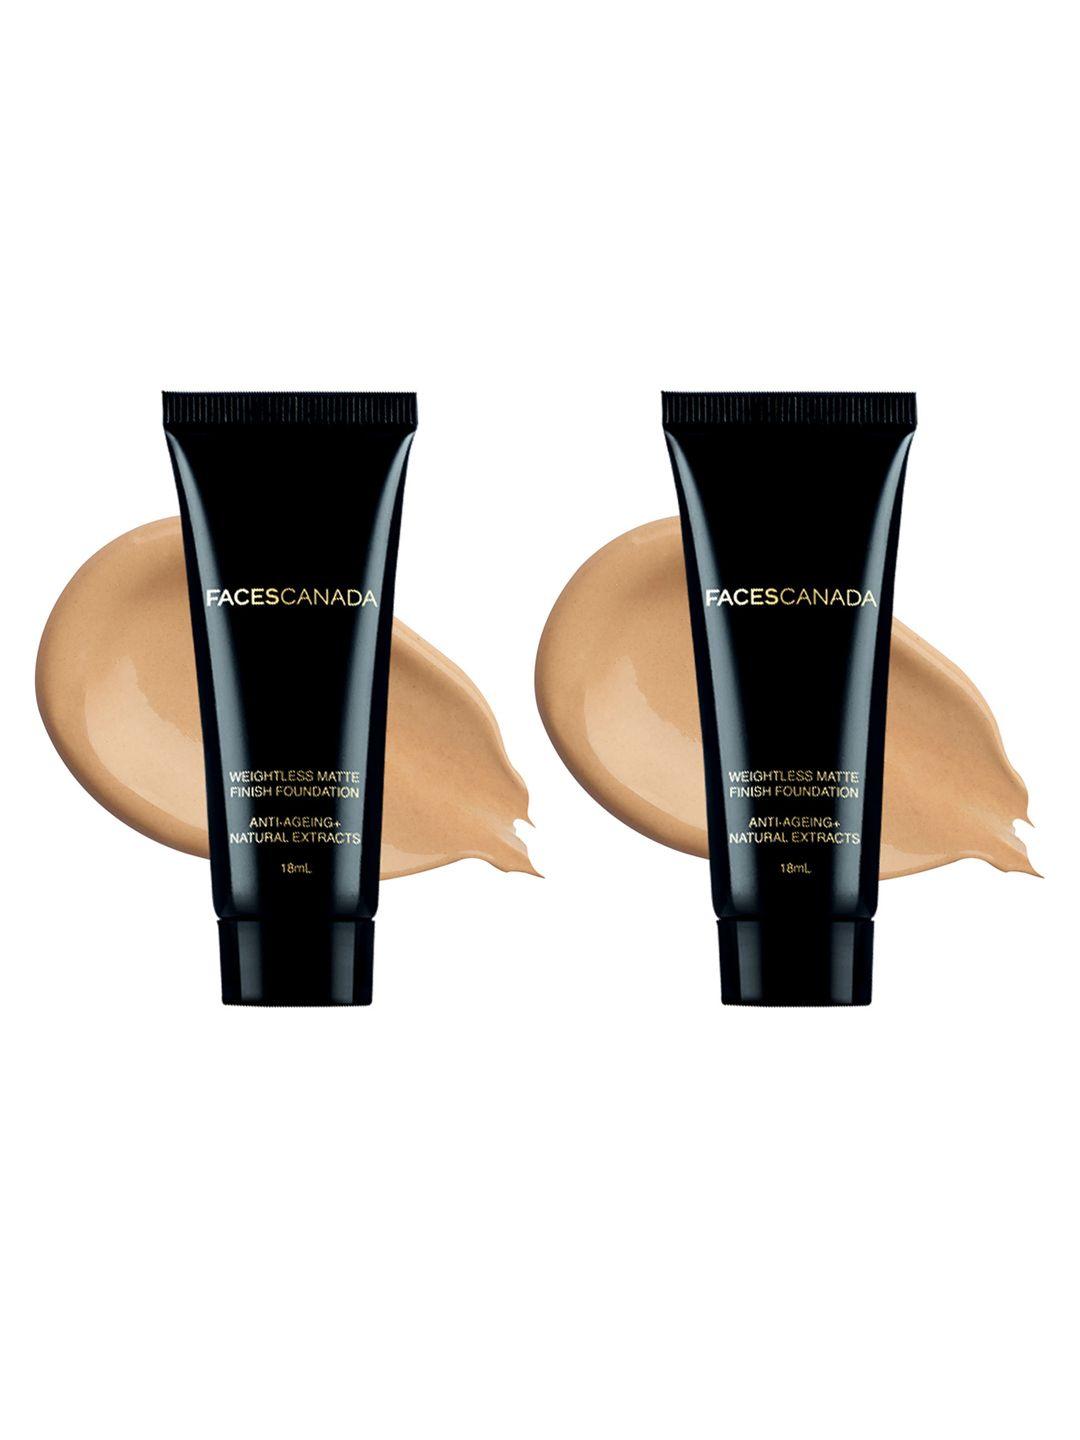 faces canada set of 2 weightless matte finish foundation 18ml each - beige 03